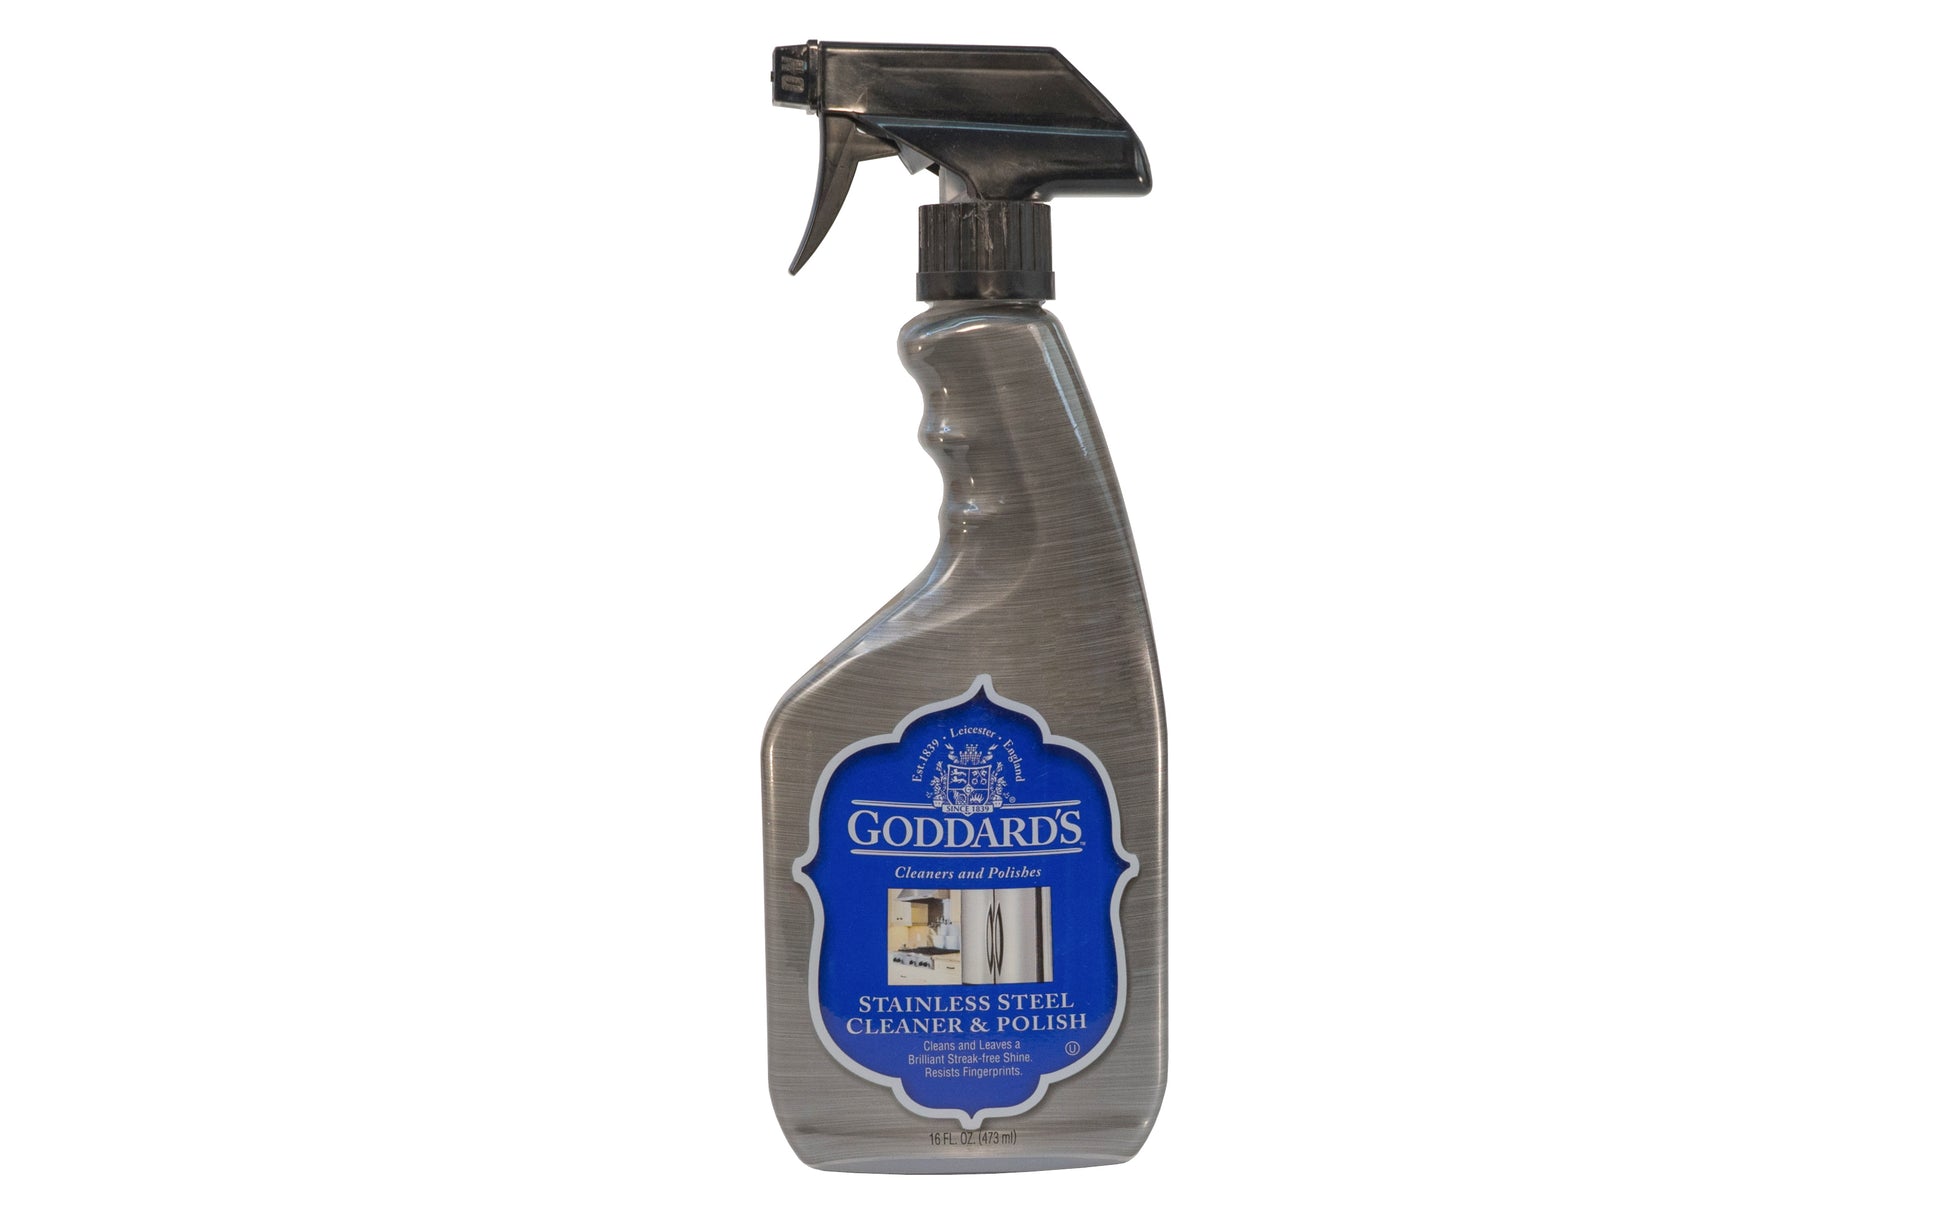 Goddard's Stainless Steel Cleaner & Polish ~ 16 oz - Instantly Cleans & Shines Stainless Steel - Model No. 707116 - Made in USA - Does Not Contain Abrasive and Will Not Scratch - Cleans Grease, Food Stains & Fingerprints